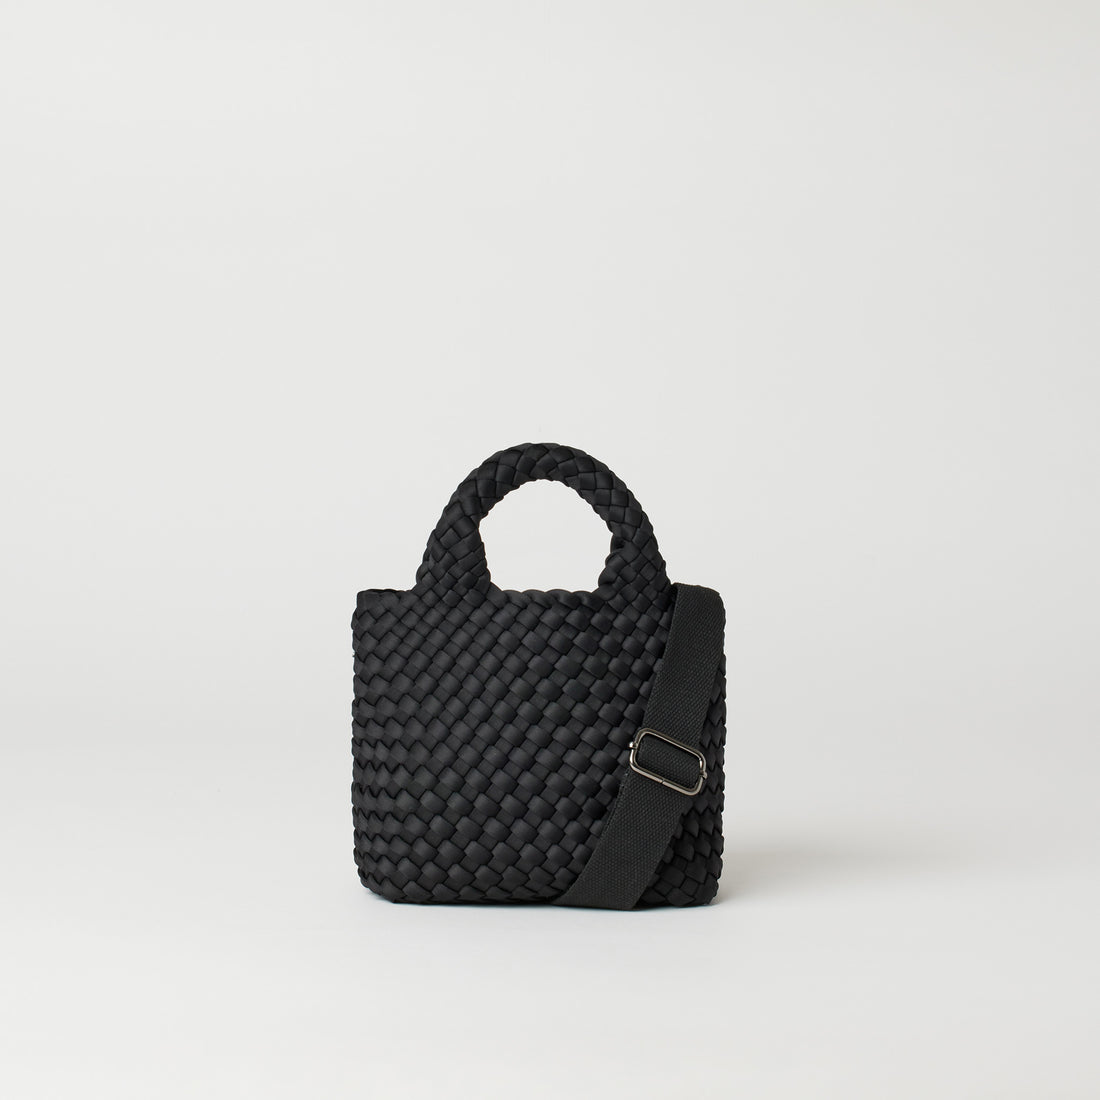 Andreina Bags Lupe crossbody bag in black colour. small size yet roomy. Handmade, interlaced material, synthetic material, water resistant, machine washable, adjustable strap, lightweight. Can be worn as crossbody or as a handbag. Designed in Sydney, Australia.